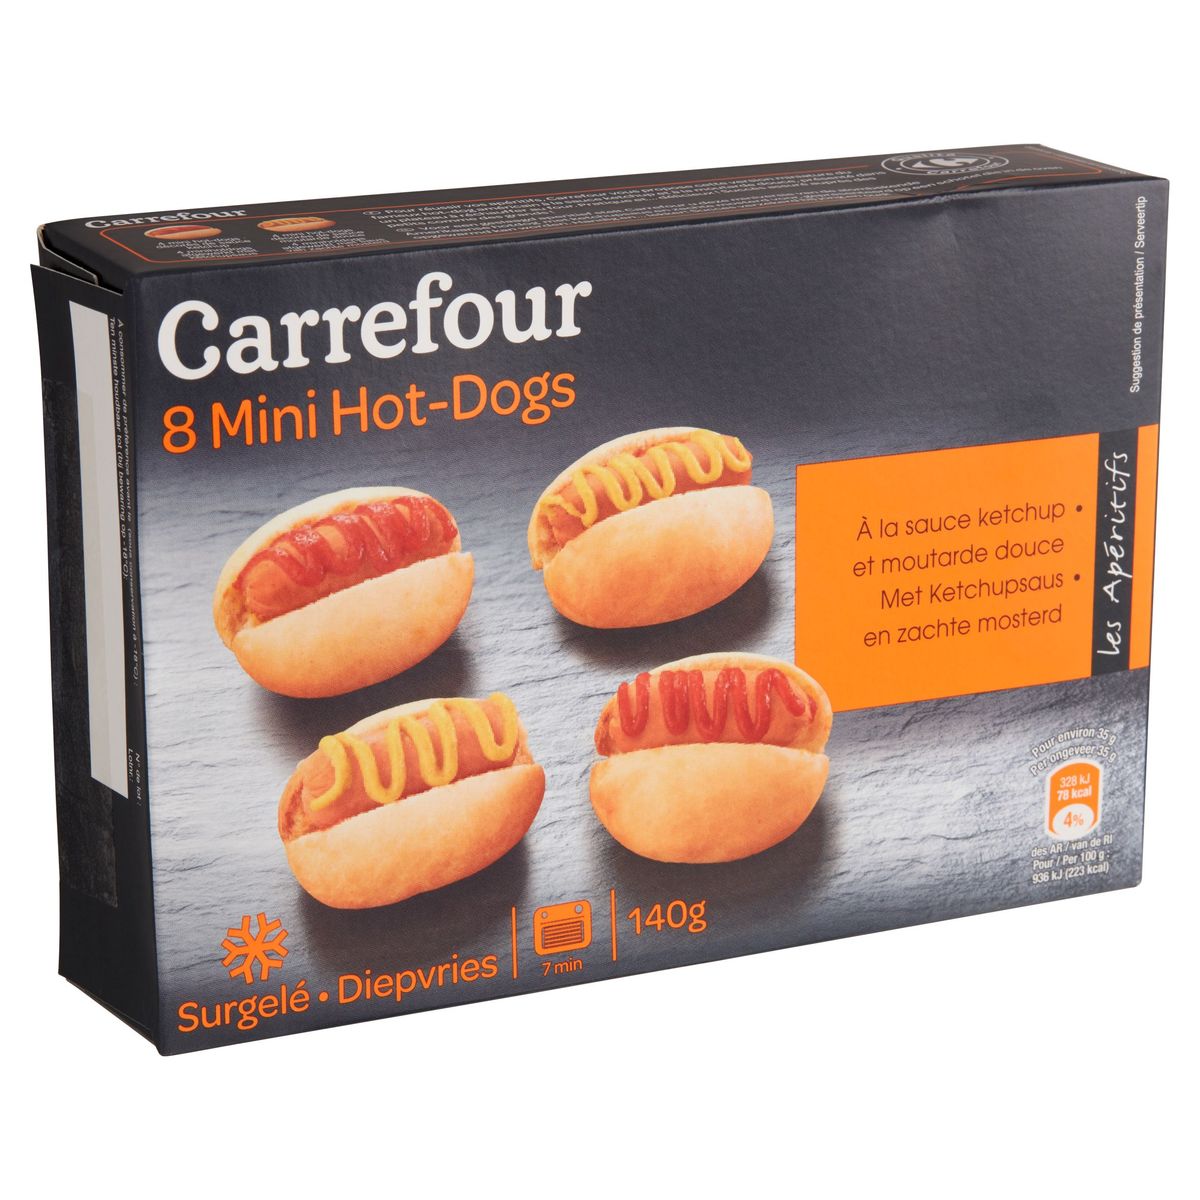 Carrefour 8 Mini Hot-Dogs 140 g